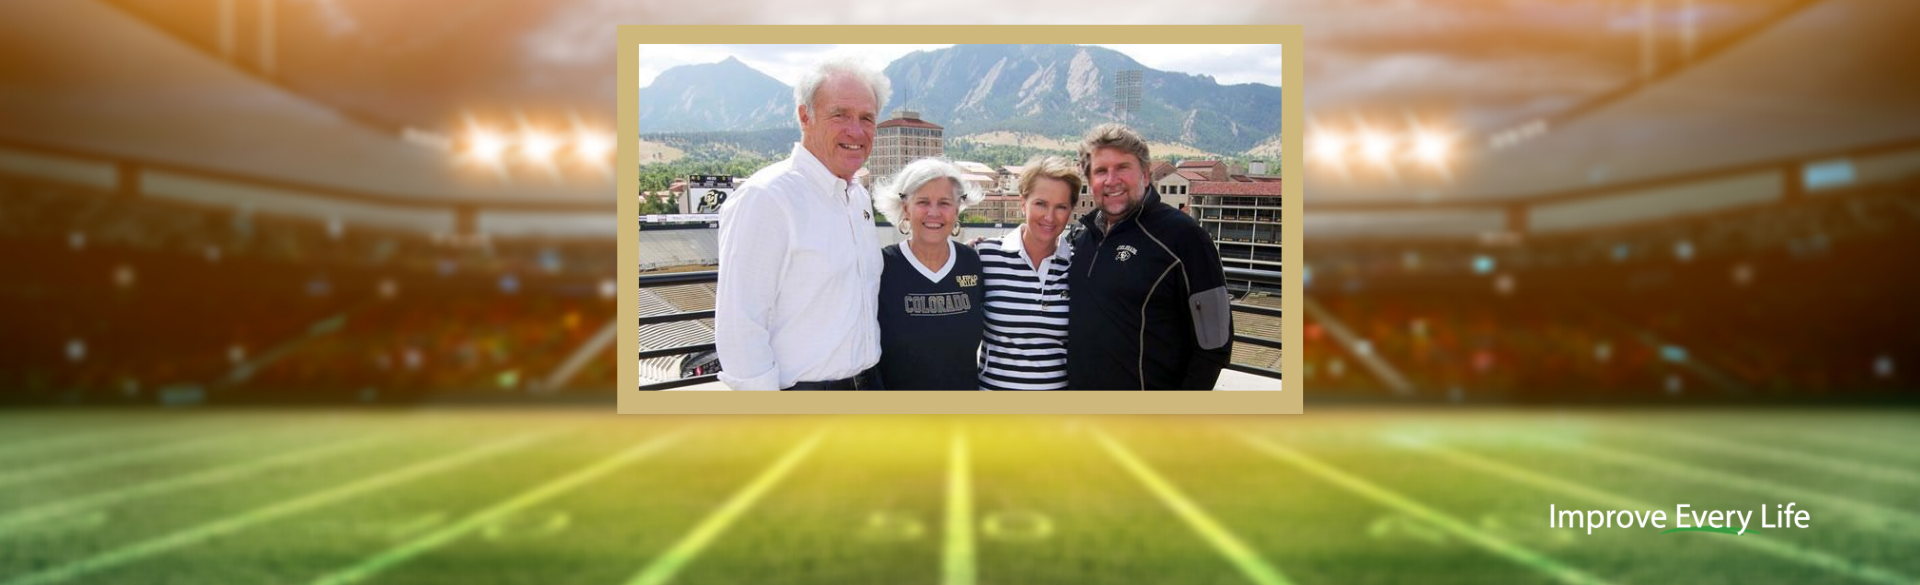 Lee Snyder, Char Snyder, Teri Trafton, and Charlie Trafton at Folsom Field